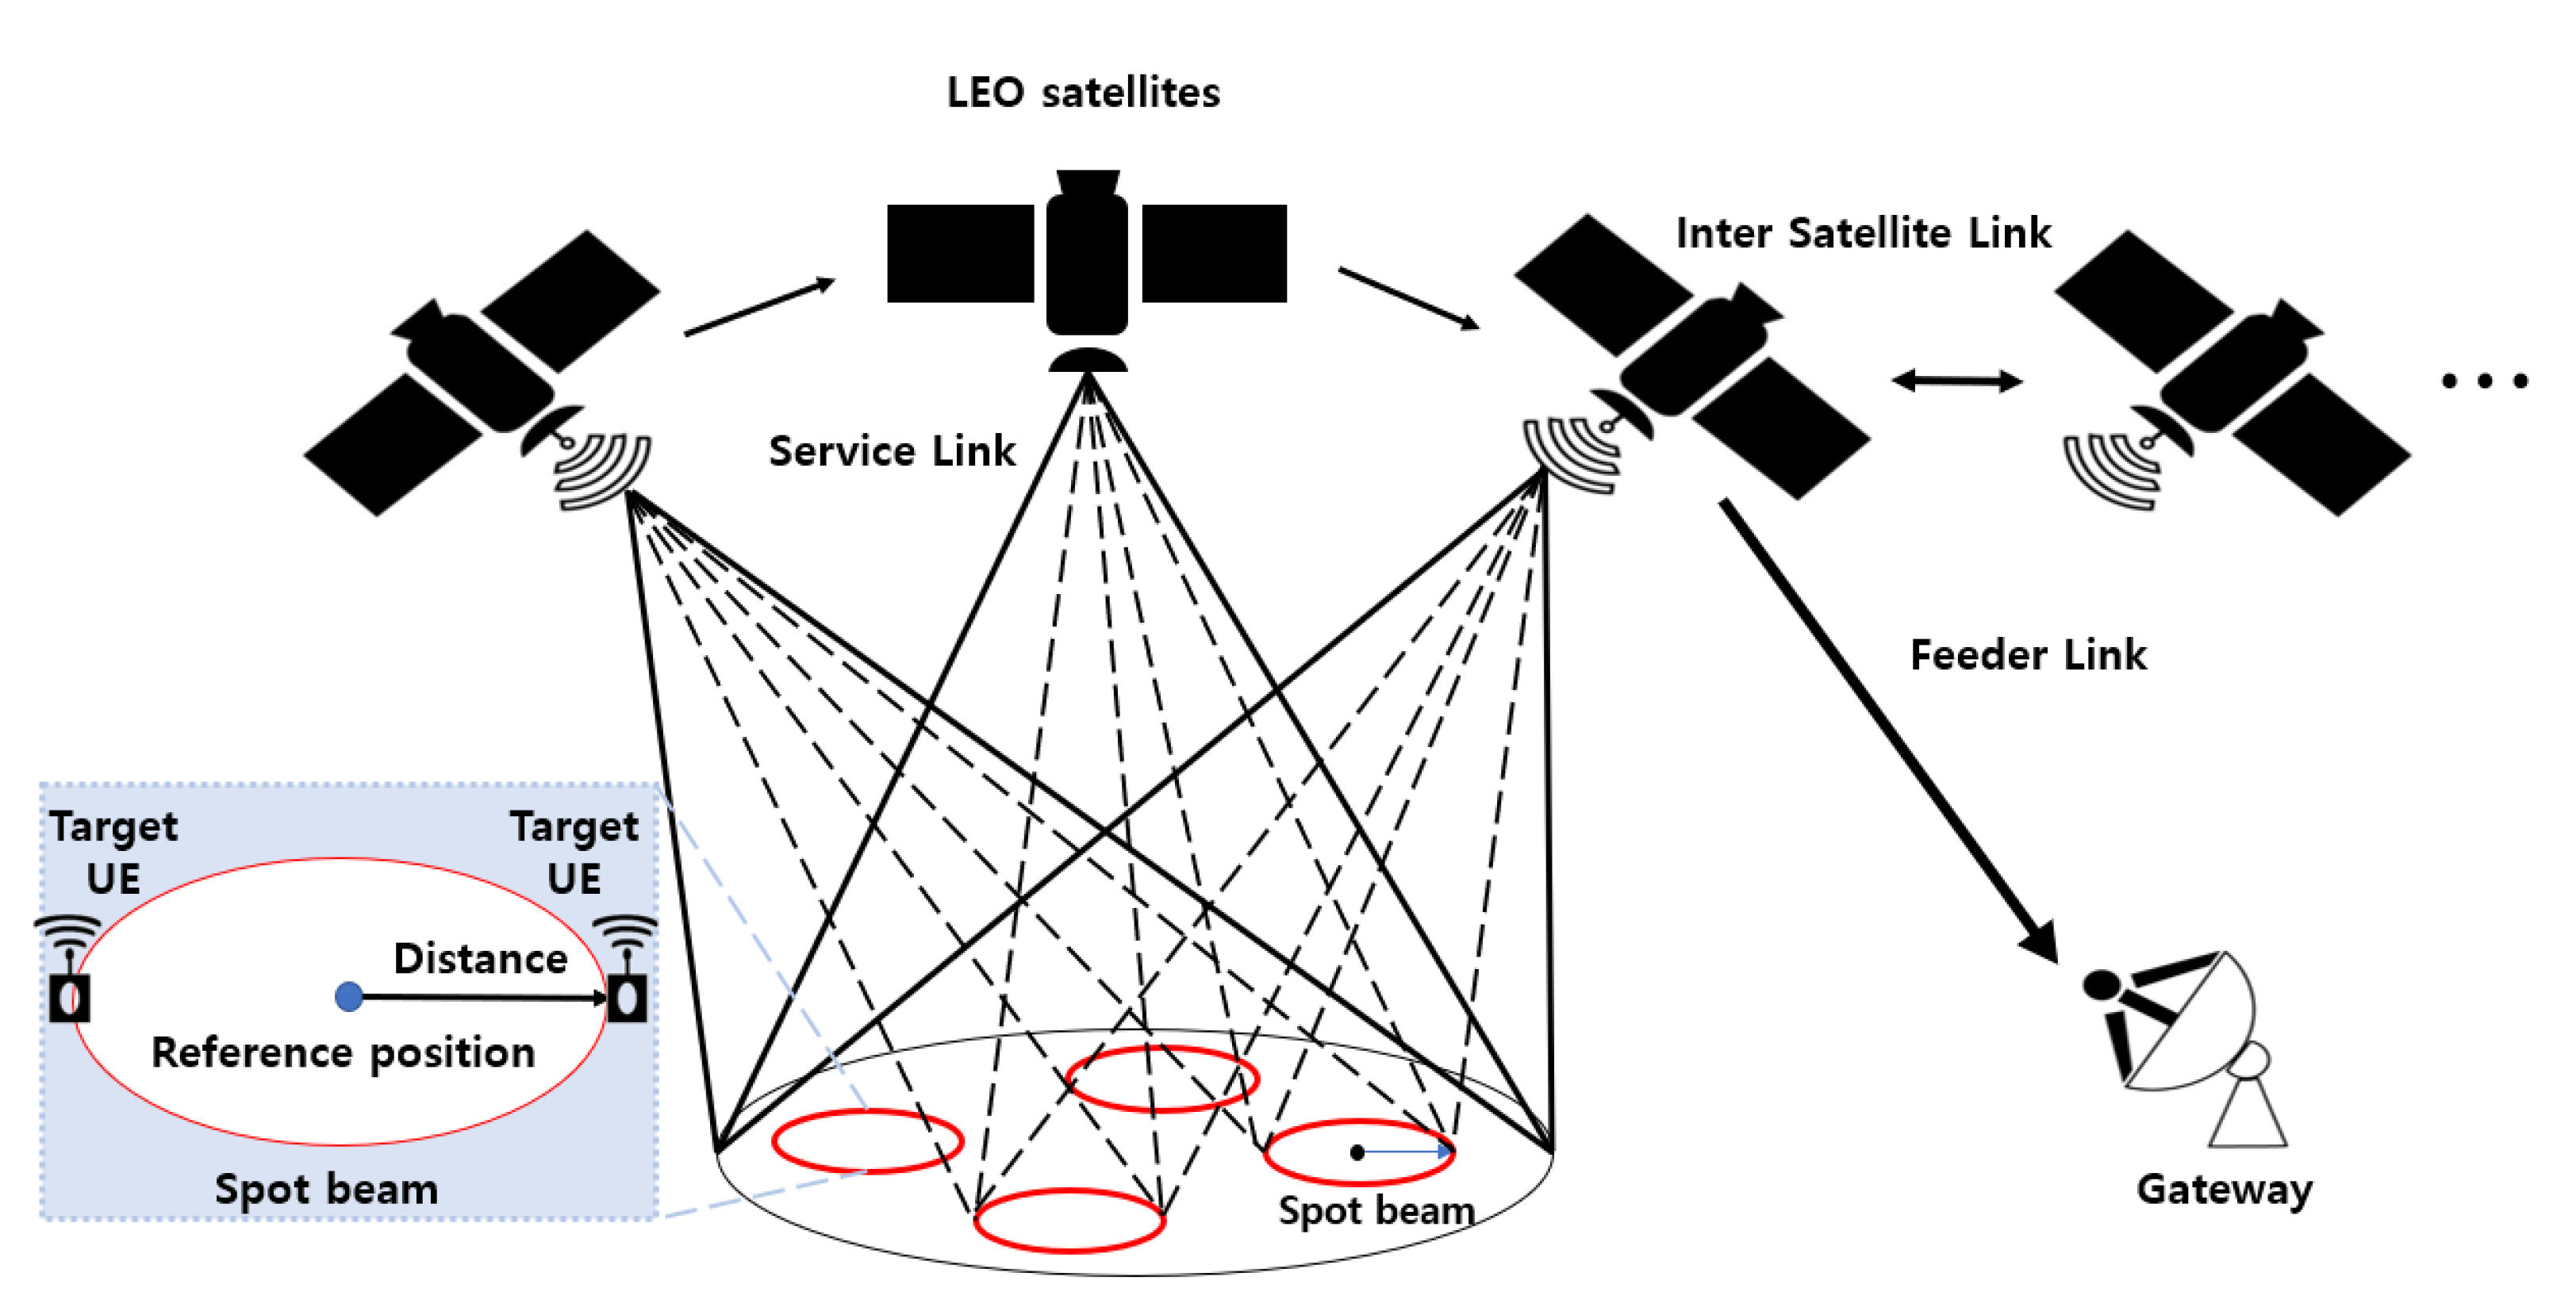 Link Budget Analysis for Satellite-Based Narrowband IoT Systems